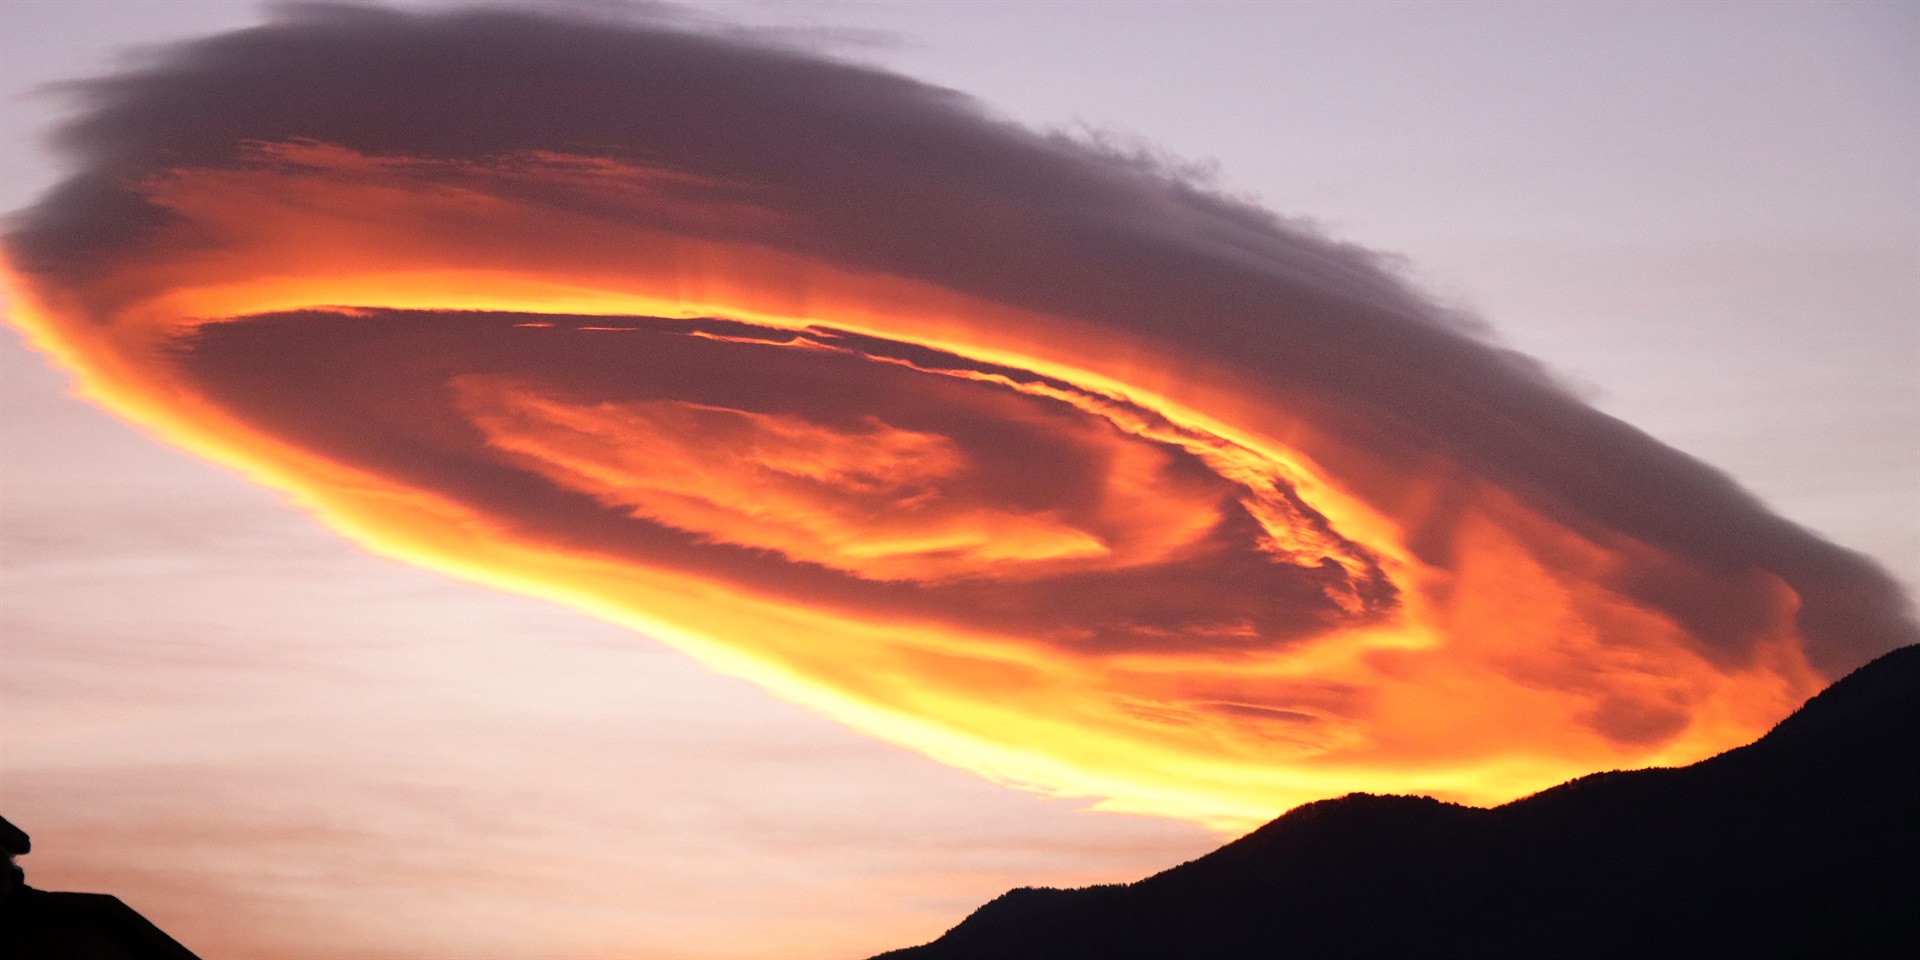 Businessinsider.co.za | Photos and videos show a glowing, UFO-shaped cloud hovering over a town in Turkey